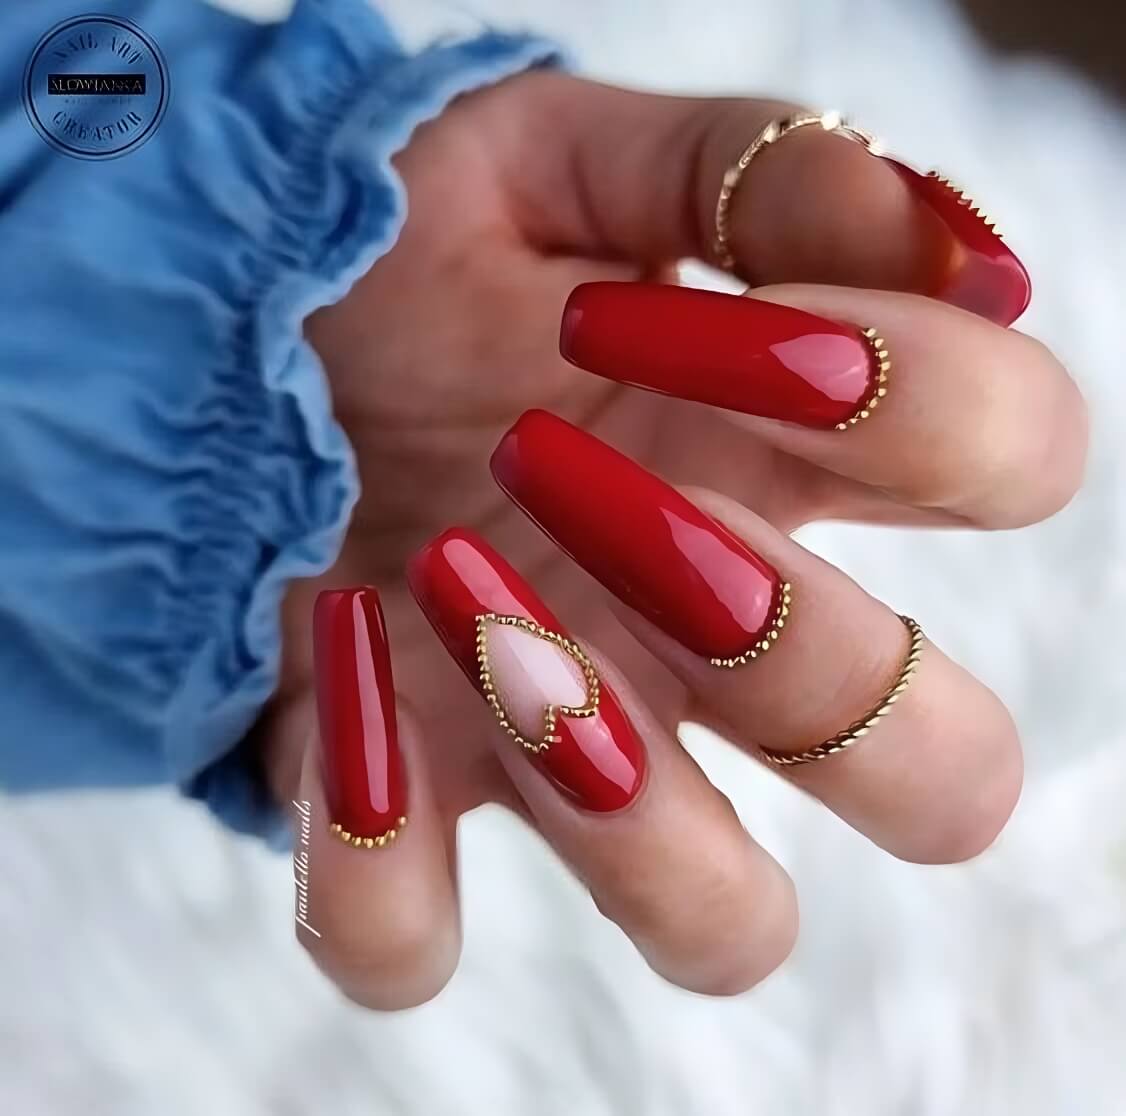 30 One-Of-A-Kind Red Nail Designs To Impress Anybody - 217